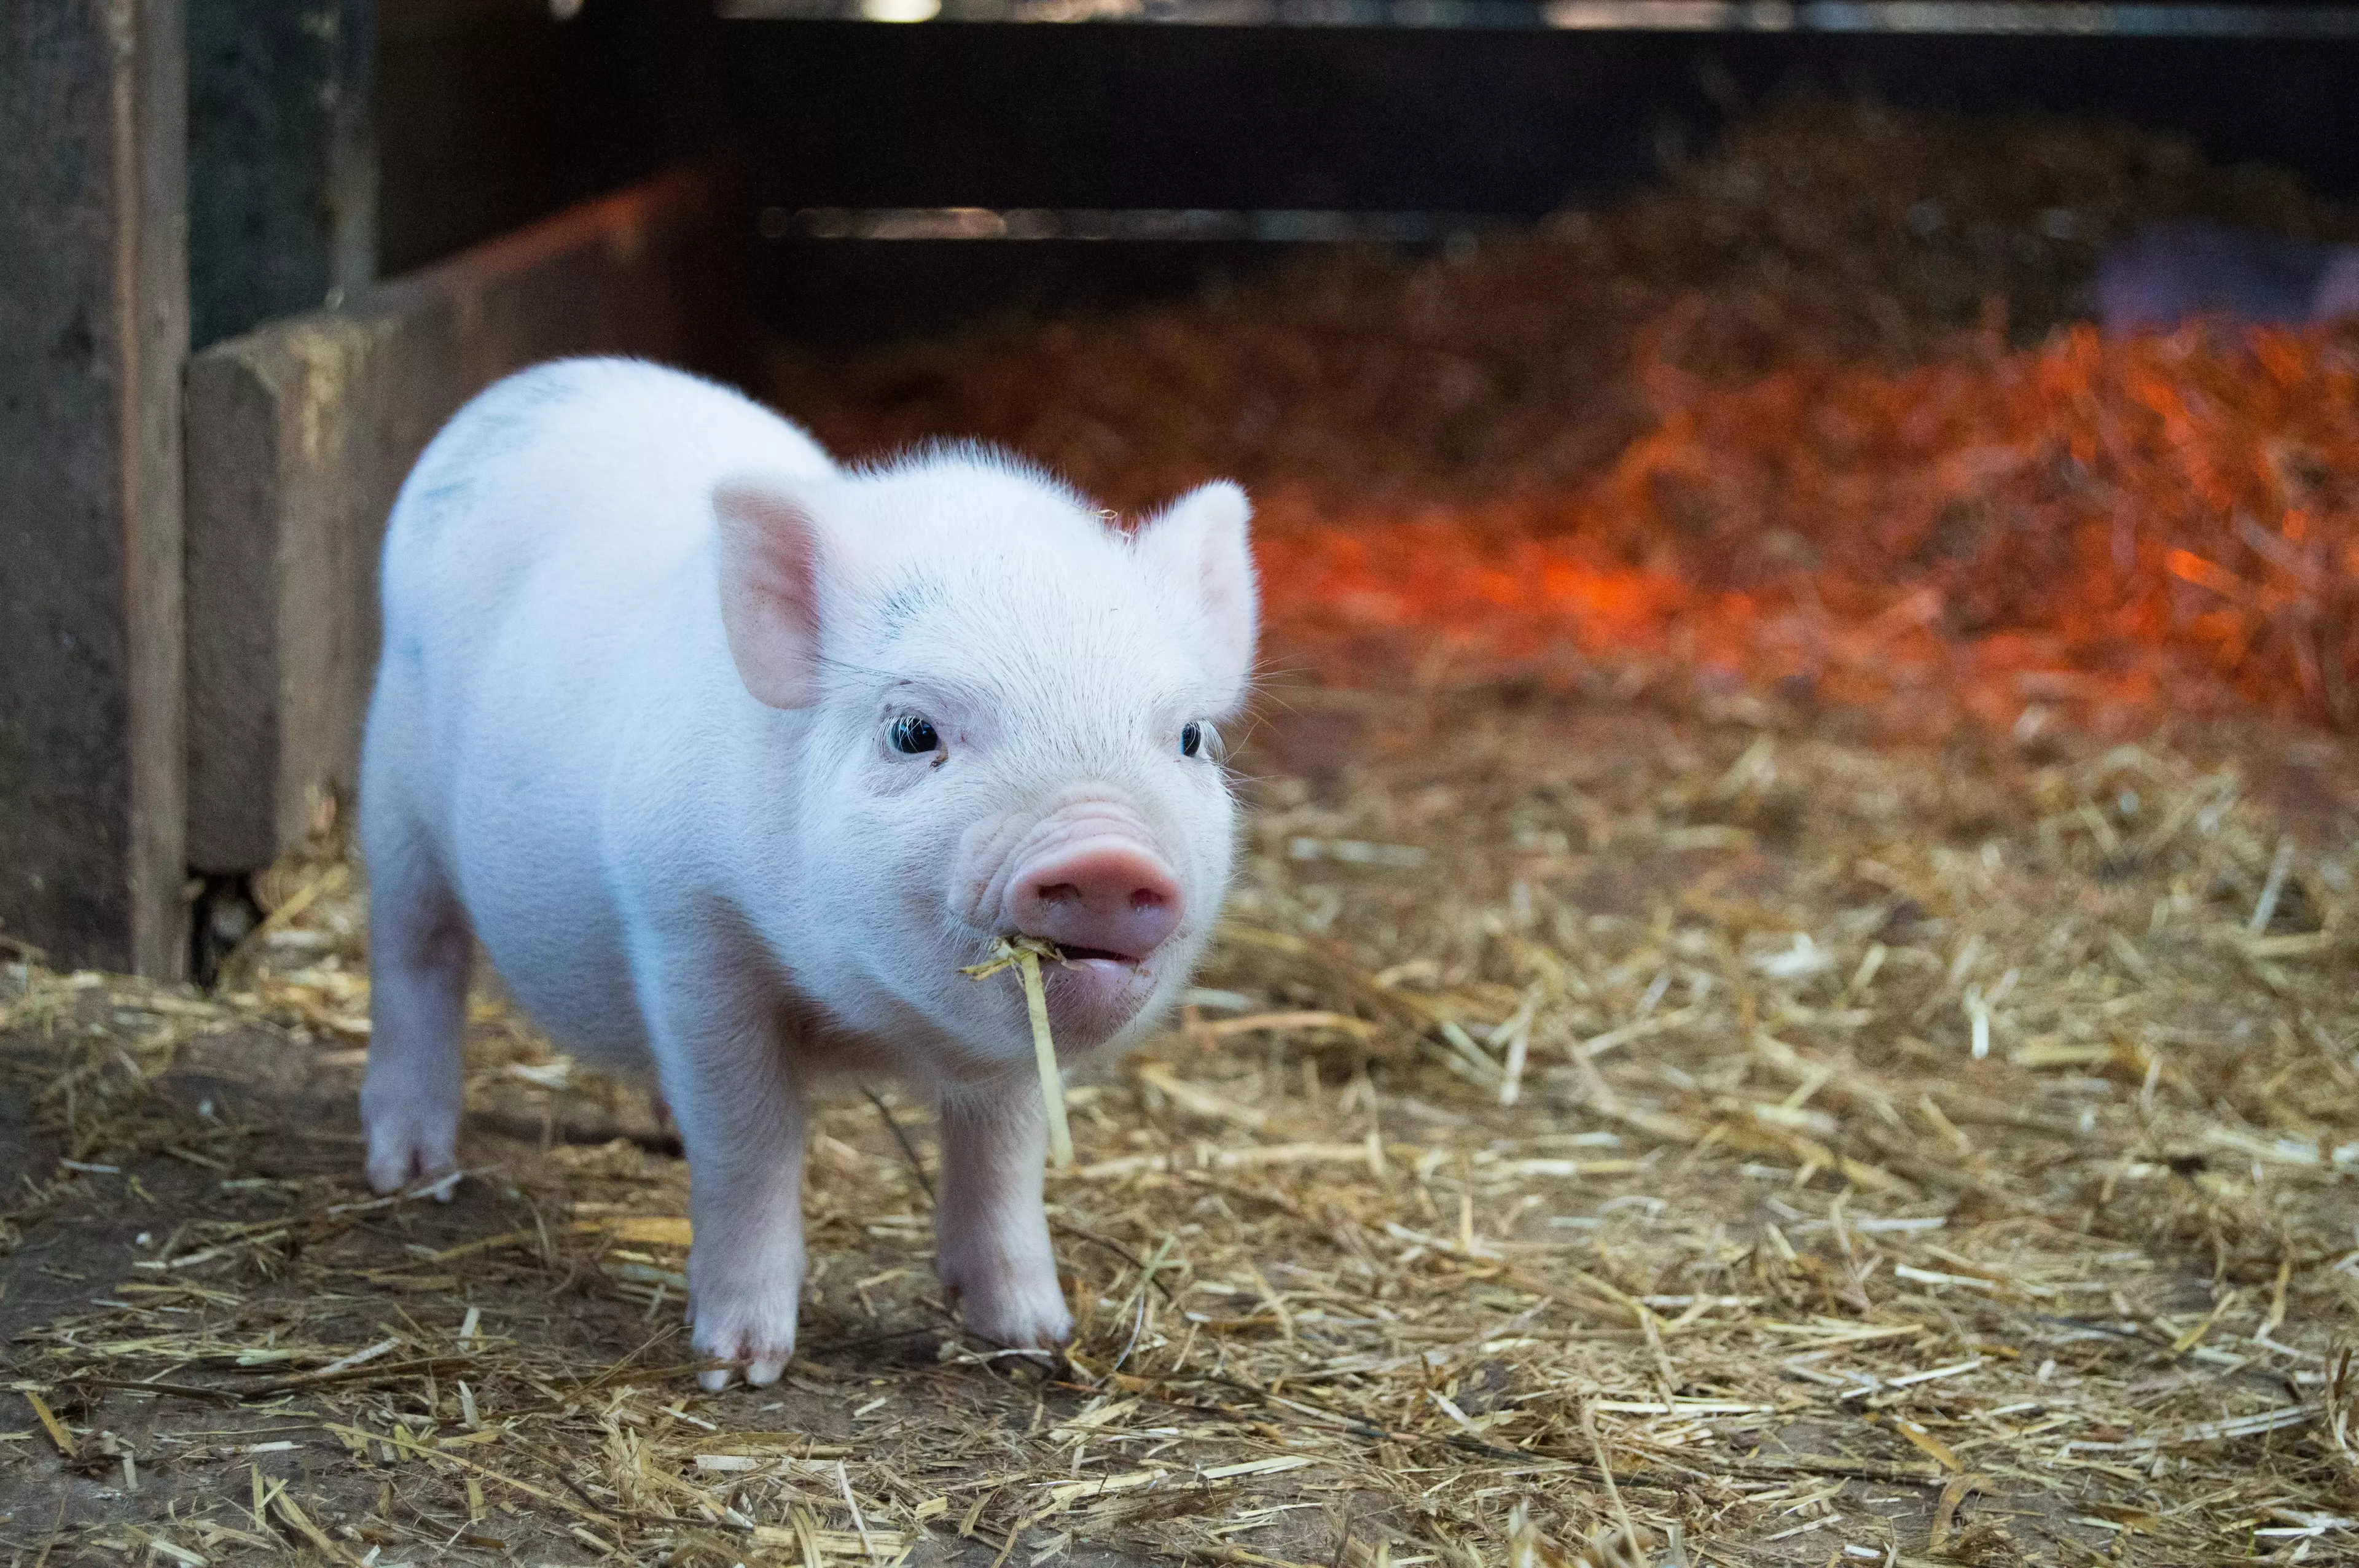 If you were forced to have a pig as a pet, would you be able to serve it up afterwards? (